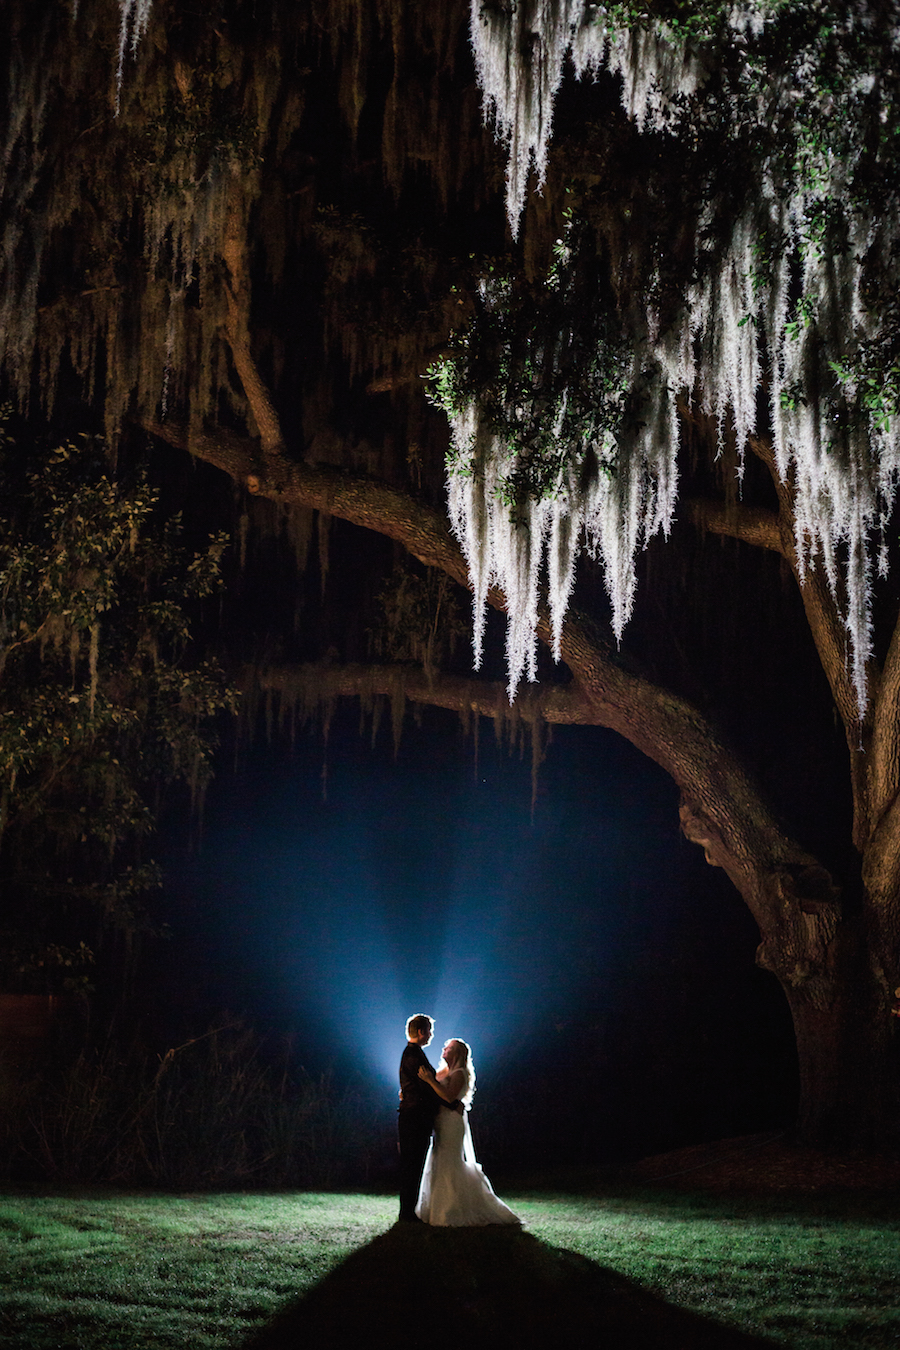 Tampa Bay Bride and Groom Evening Outdoor Wedding Portrait with Moon Accent| Tampa Bay Wedding Photographer Jillian Joseph Photography